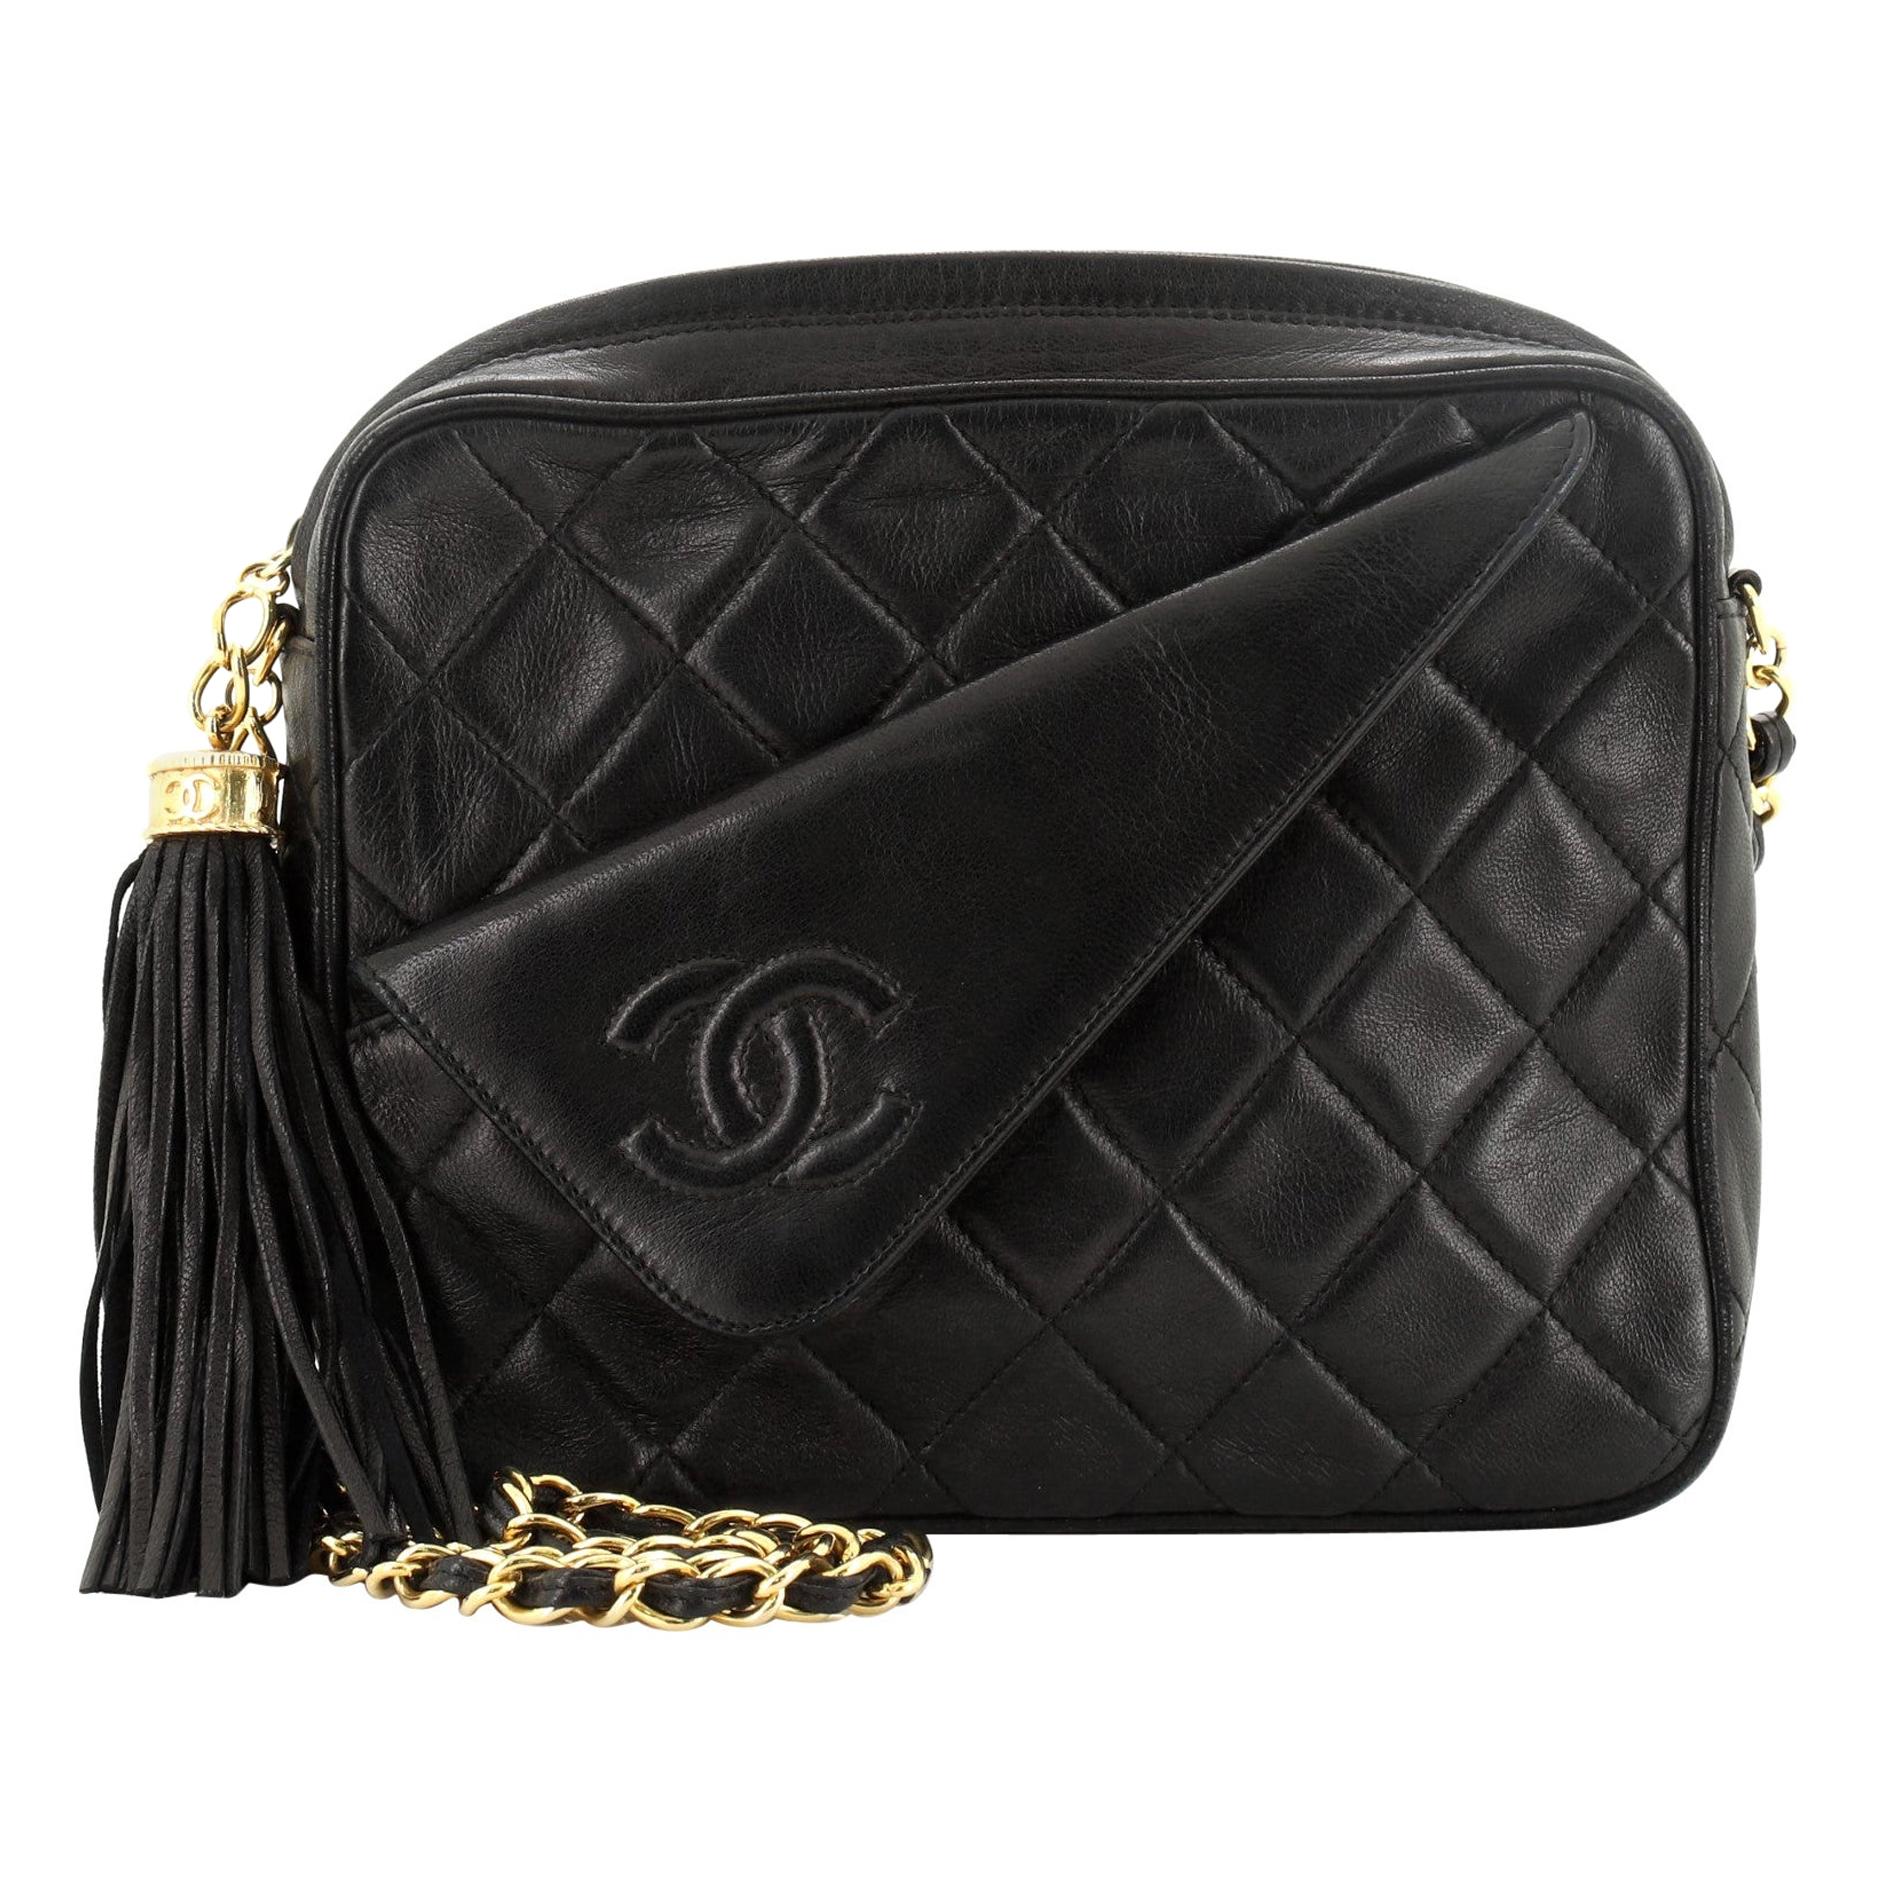 This Chanel Vintage Front Pocket Camera Bag Quilted Lambskin Small, crafted in black quilted leather, features a chain link strap, front flap pocket with CC stitched logo, and gold-tone hardware. Its top zip CC charm tassel closure opens to a black